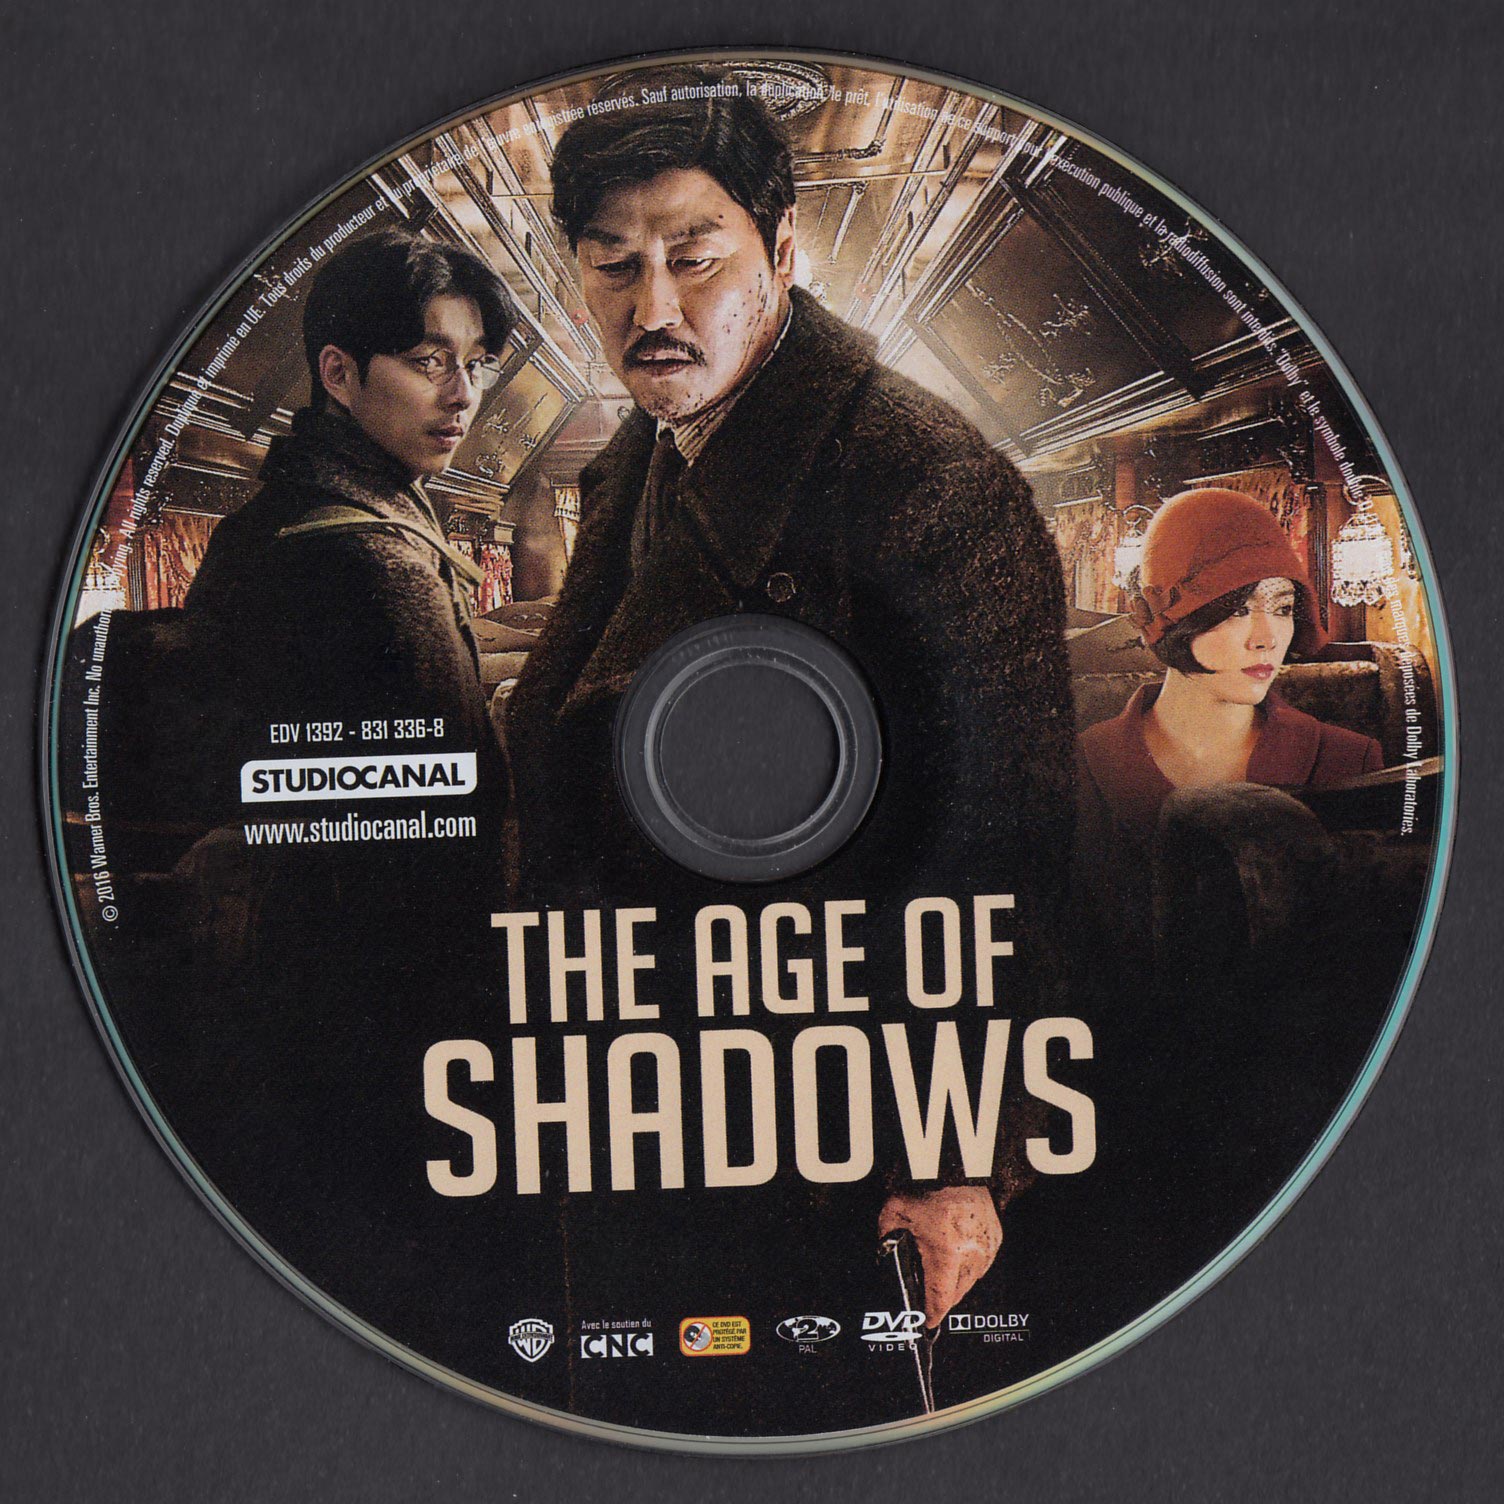 The age of shadows